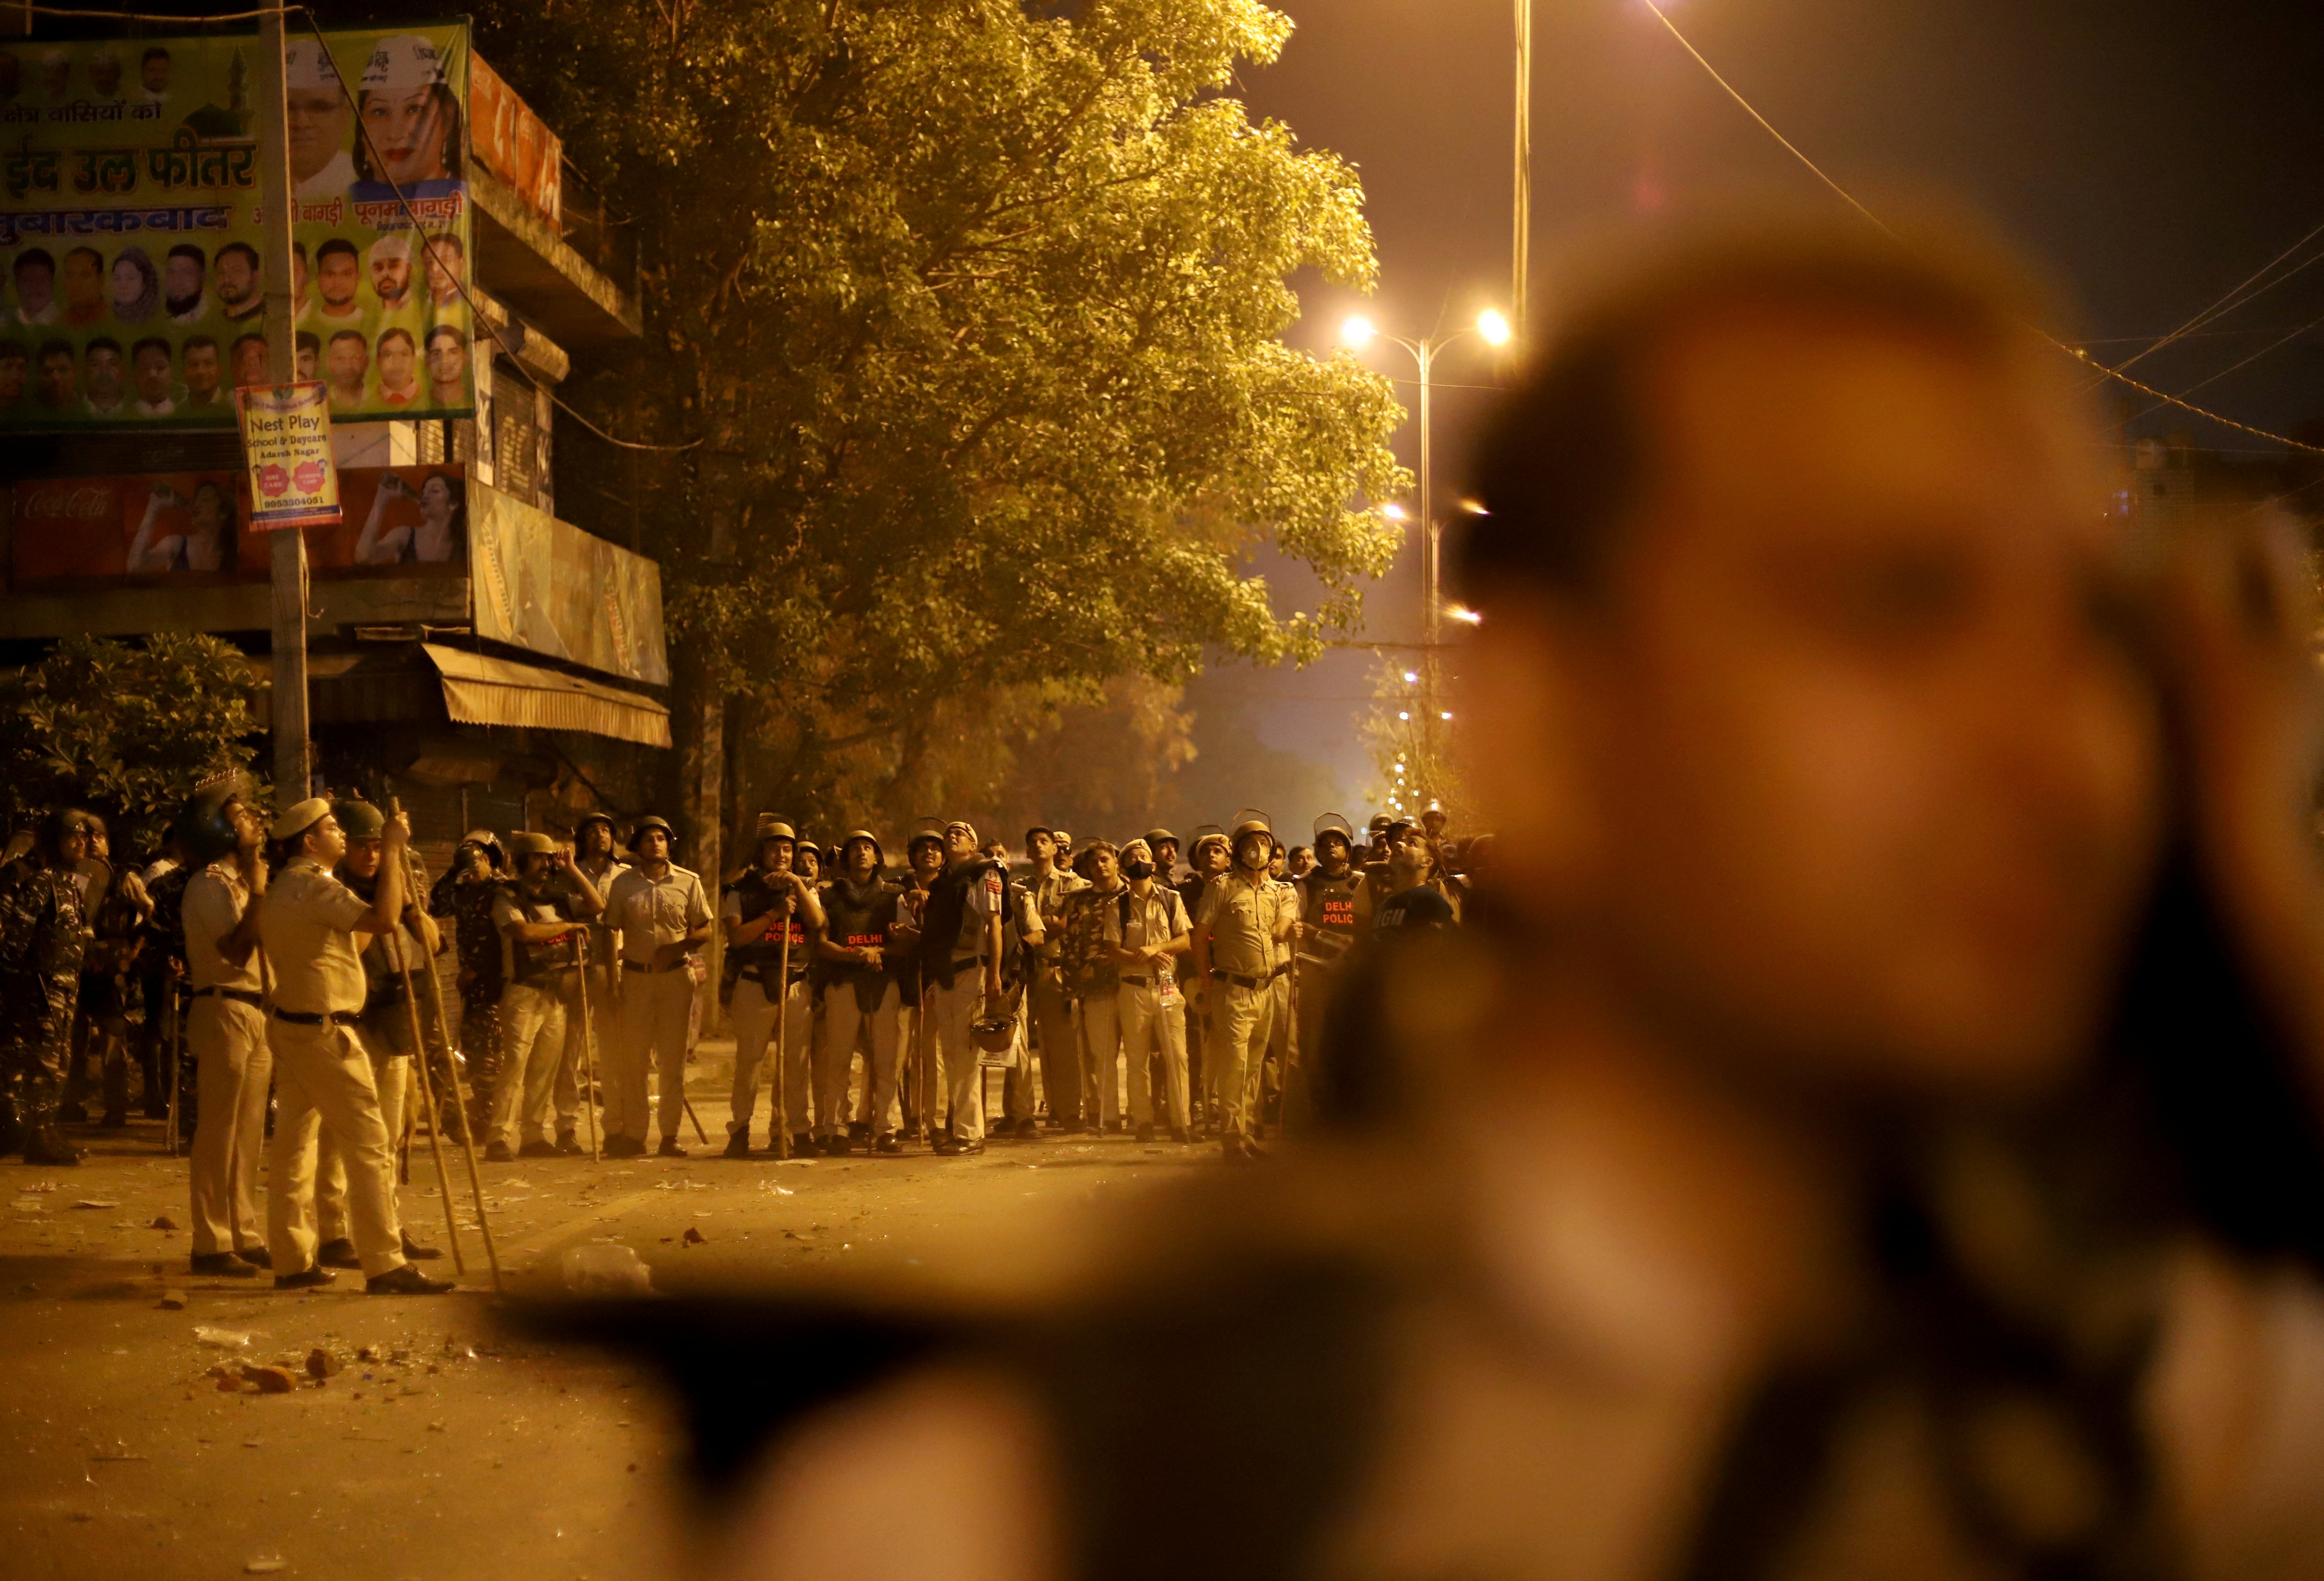 Police personnel stand guard after clashes broke out during a Hindu religious procession in Jahangirpuri area of New Delhi